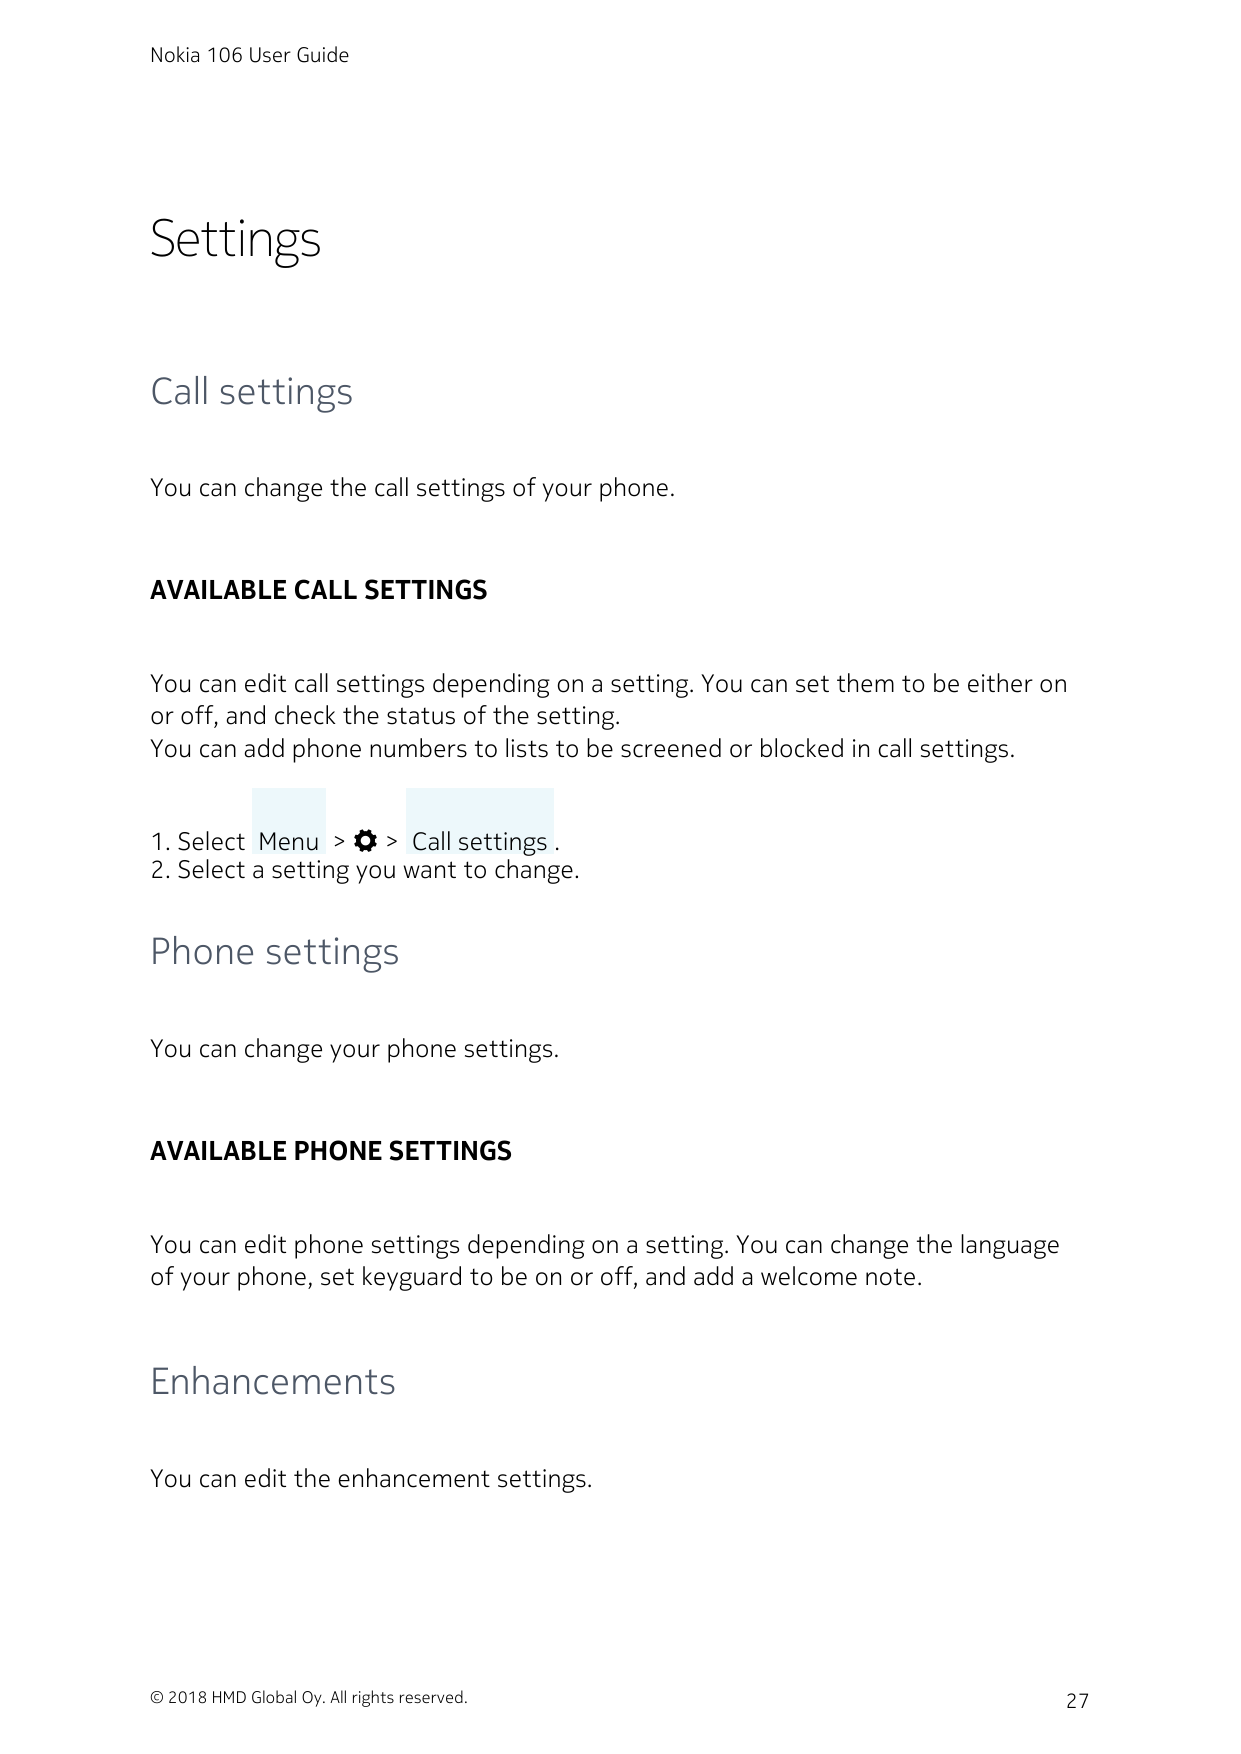 Nokia 106 User GuideSettingsCall settingsYou can change the call settings of your phone.AVAILABLE CALL SETTINGSYou can edit call